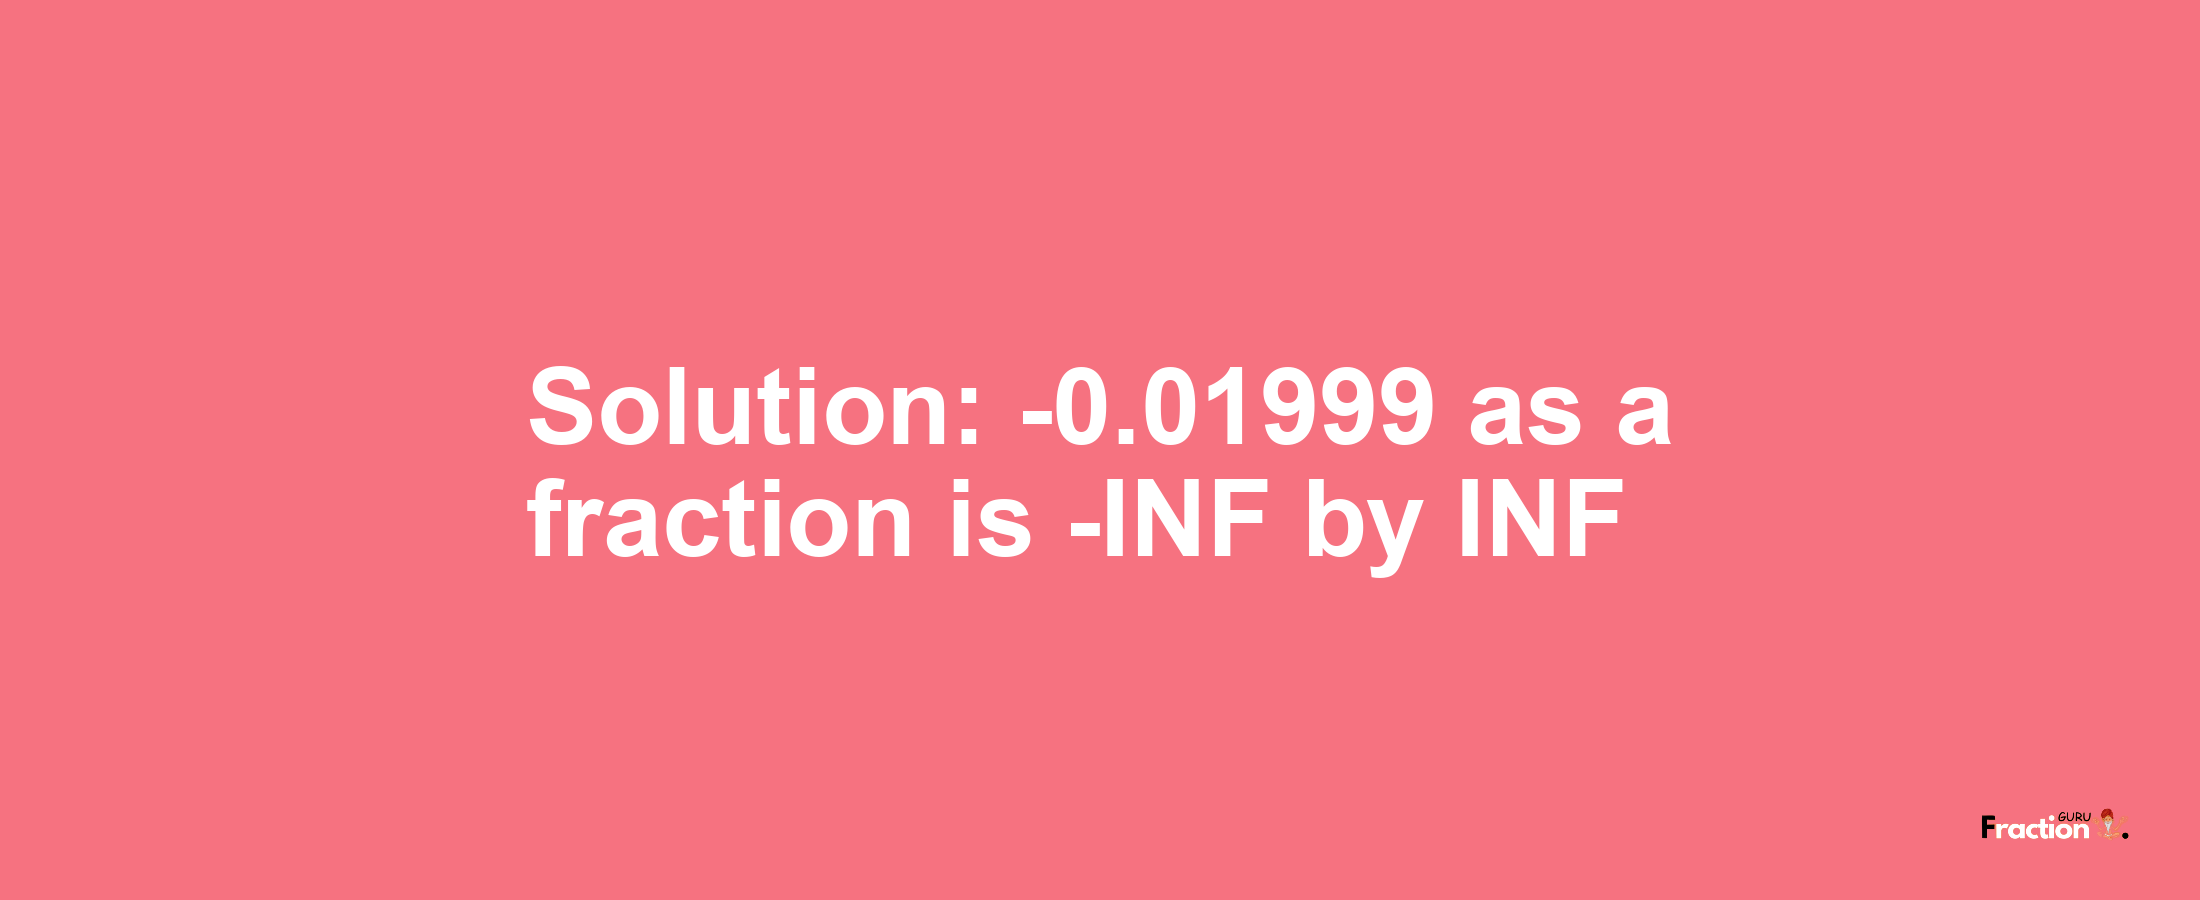 Solution:-0.01999 as a fraction is -INF/INF